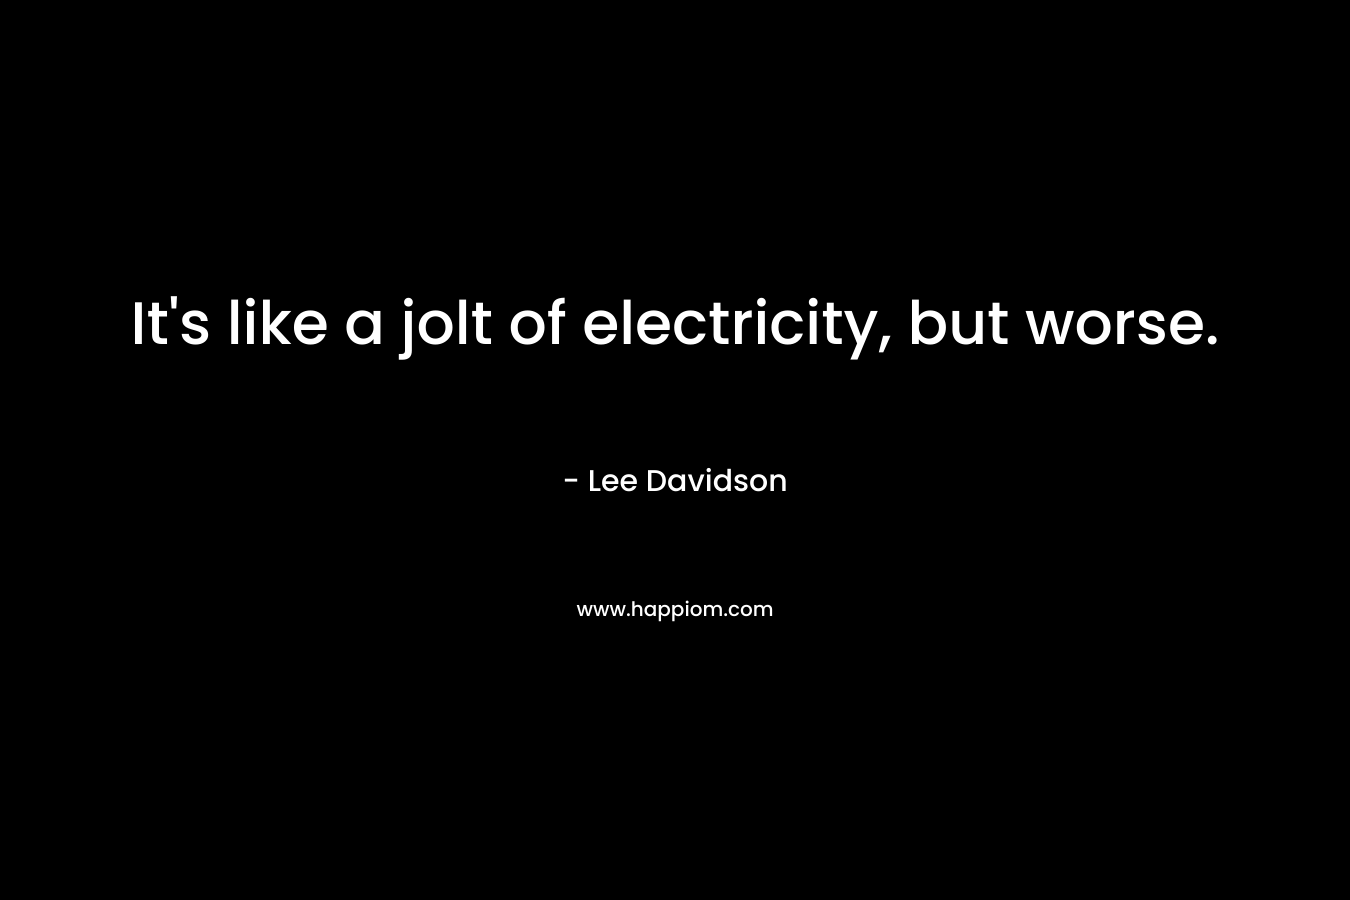 It’s like a jolt of electricity, but worse. – Lee Davidson